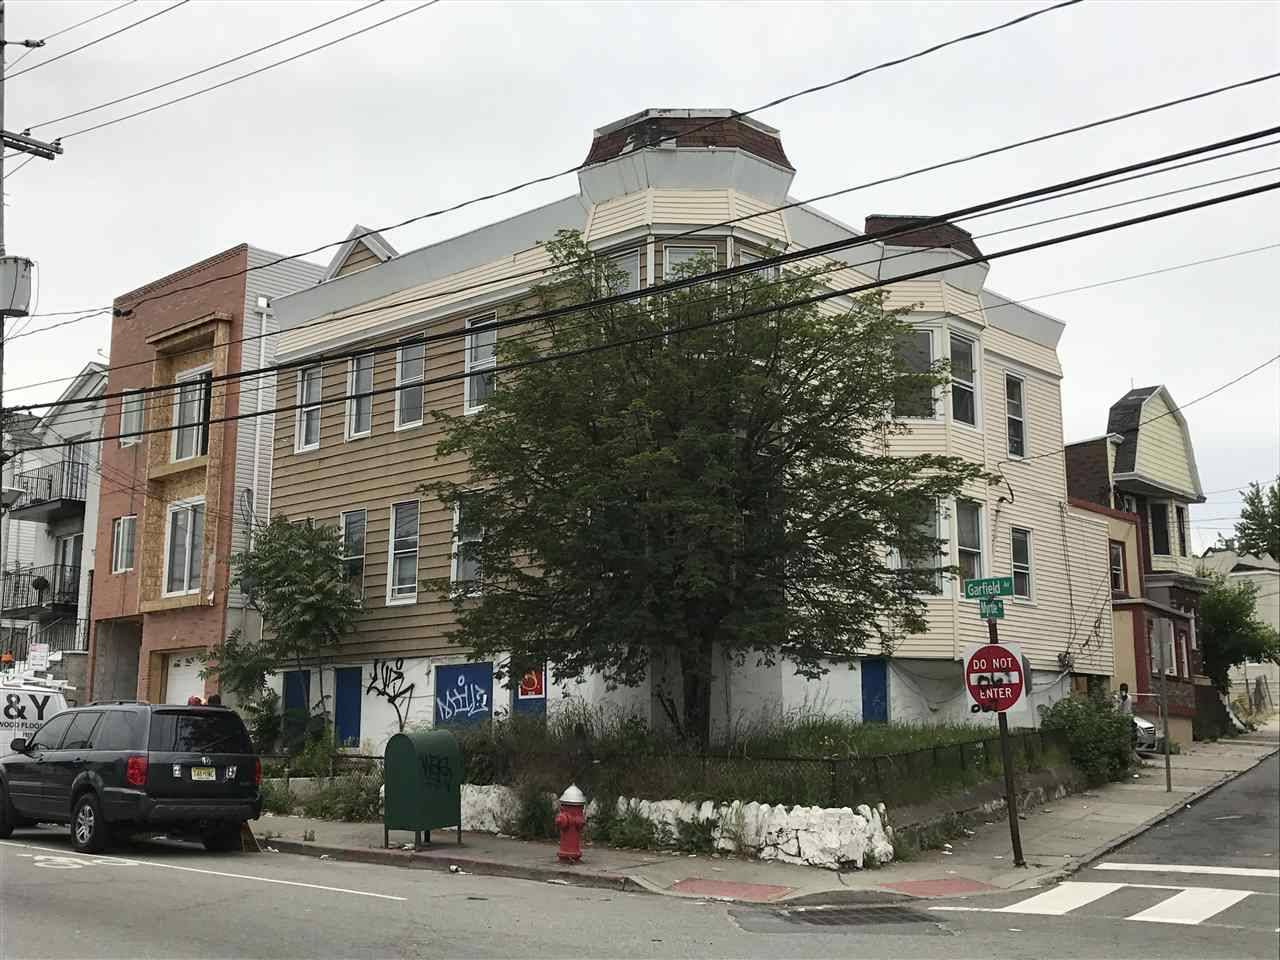 Investment opportunity to own a five unit corner building within walking distant to the Garfield Light Rail Station